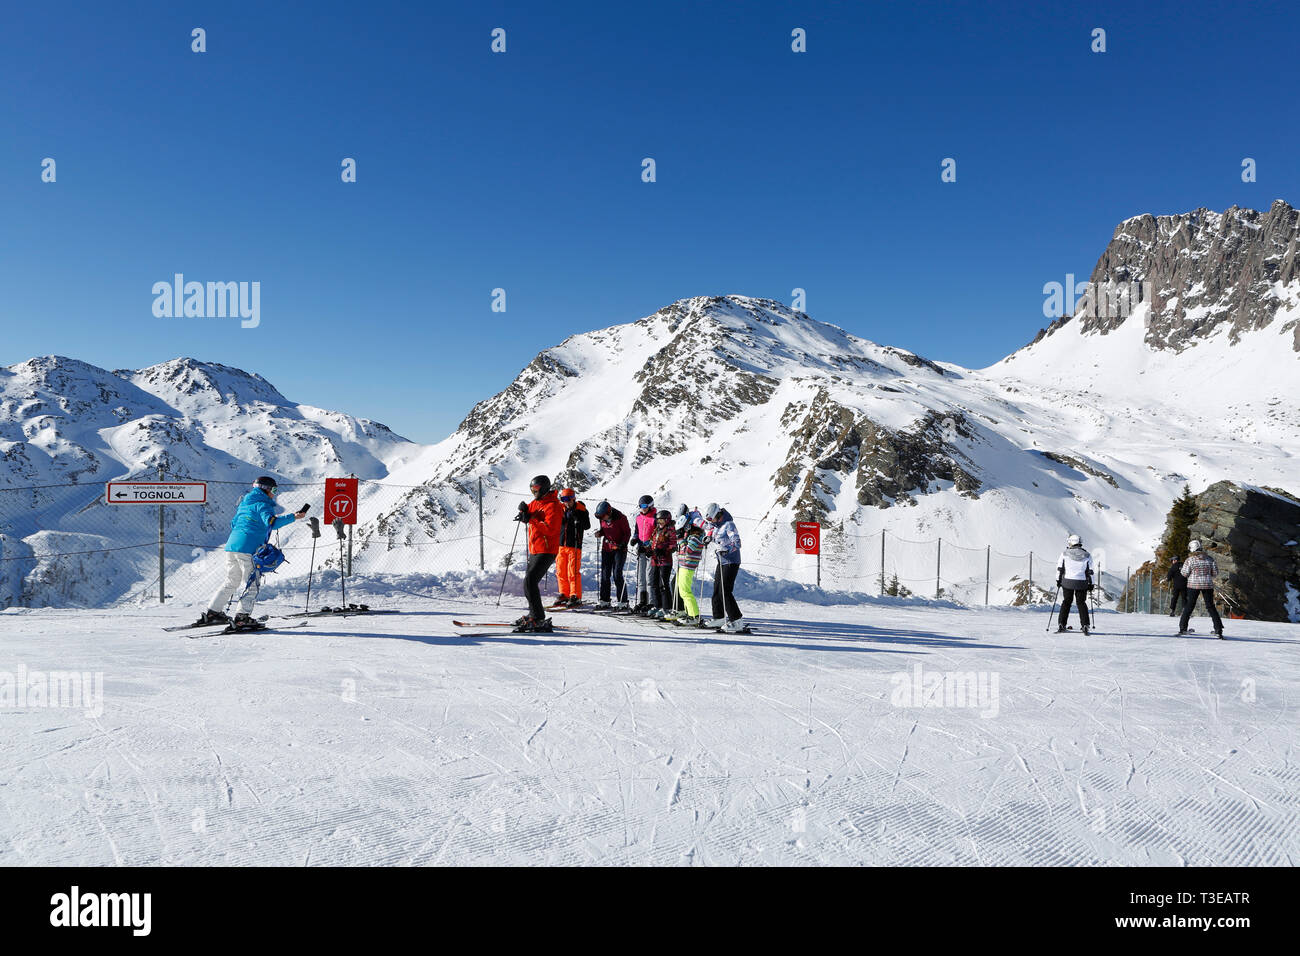 A group of skiers is photographed Stock Photo